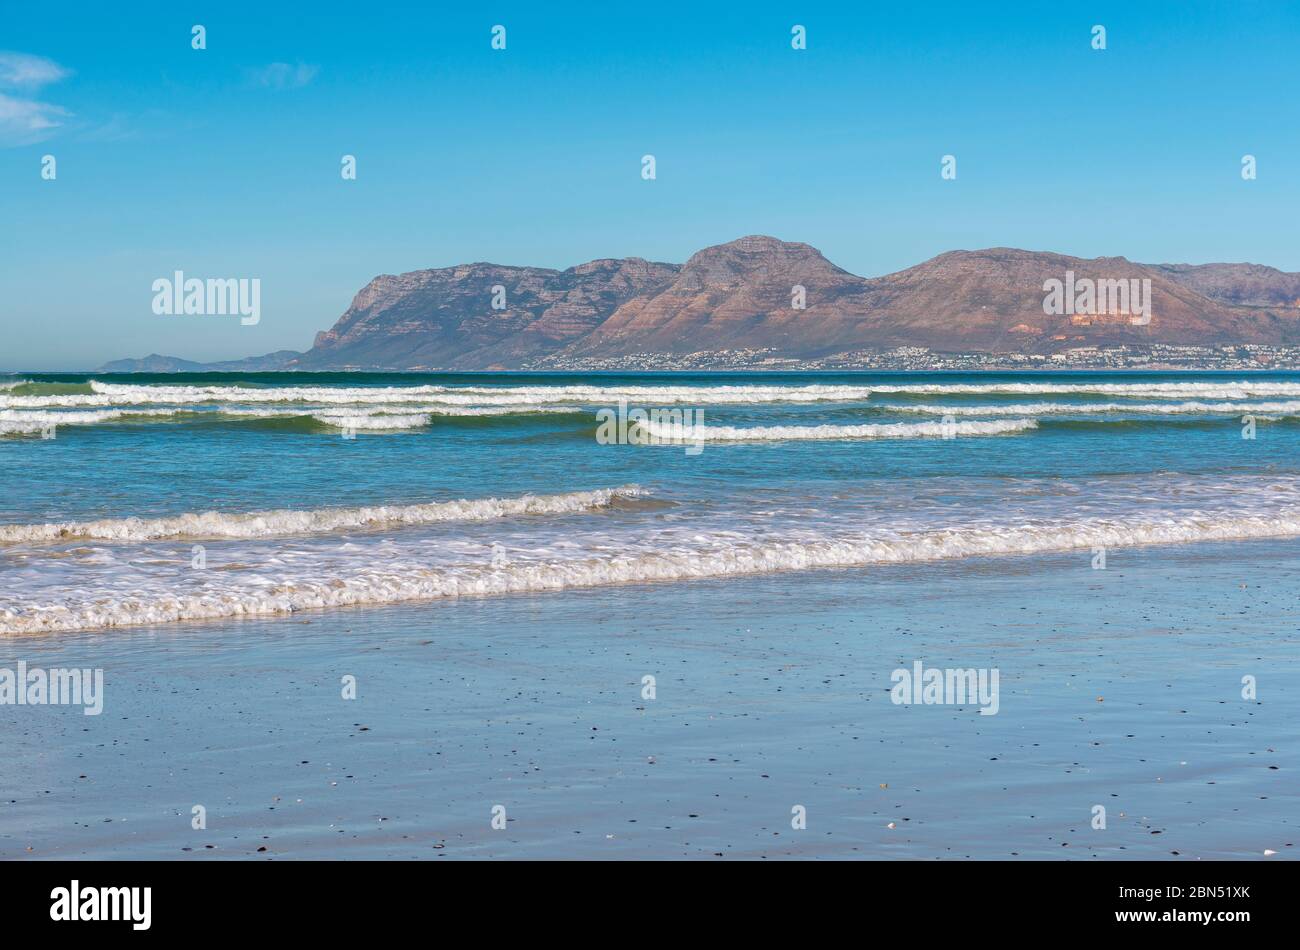 Landscape of surfers paradise Muizenberg Beach without people, Cape Town, South Africa. Stock Photo